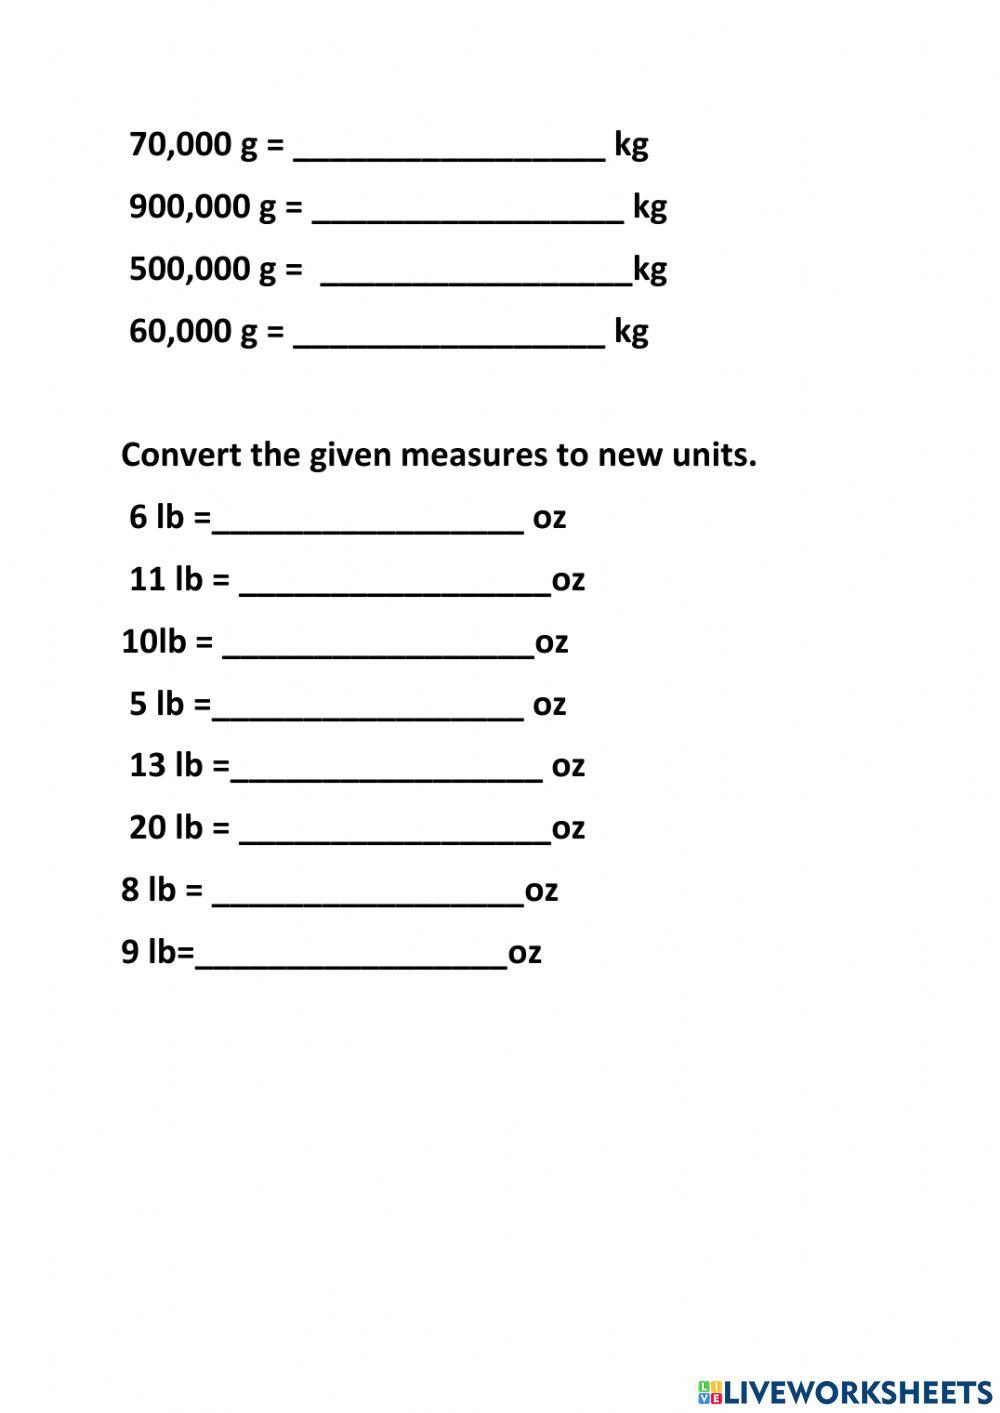 Operations in Weight Measurement